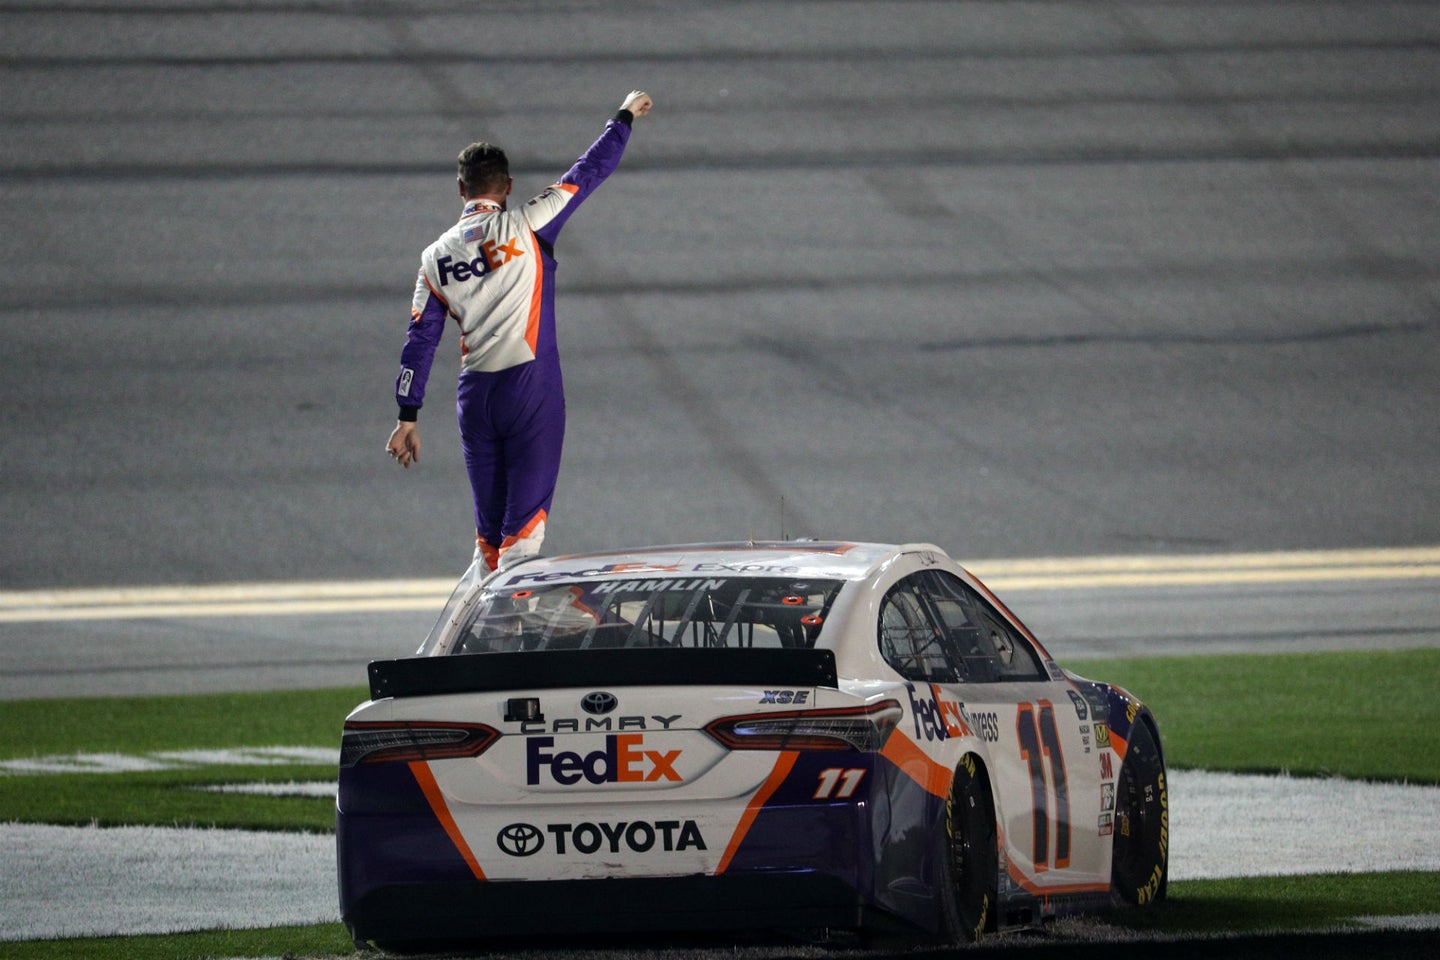 How Denny Hamlin Ended His Year-Long Drought With an Emotional Daytona 500 Victory